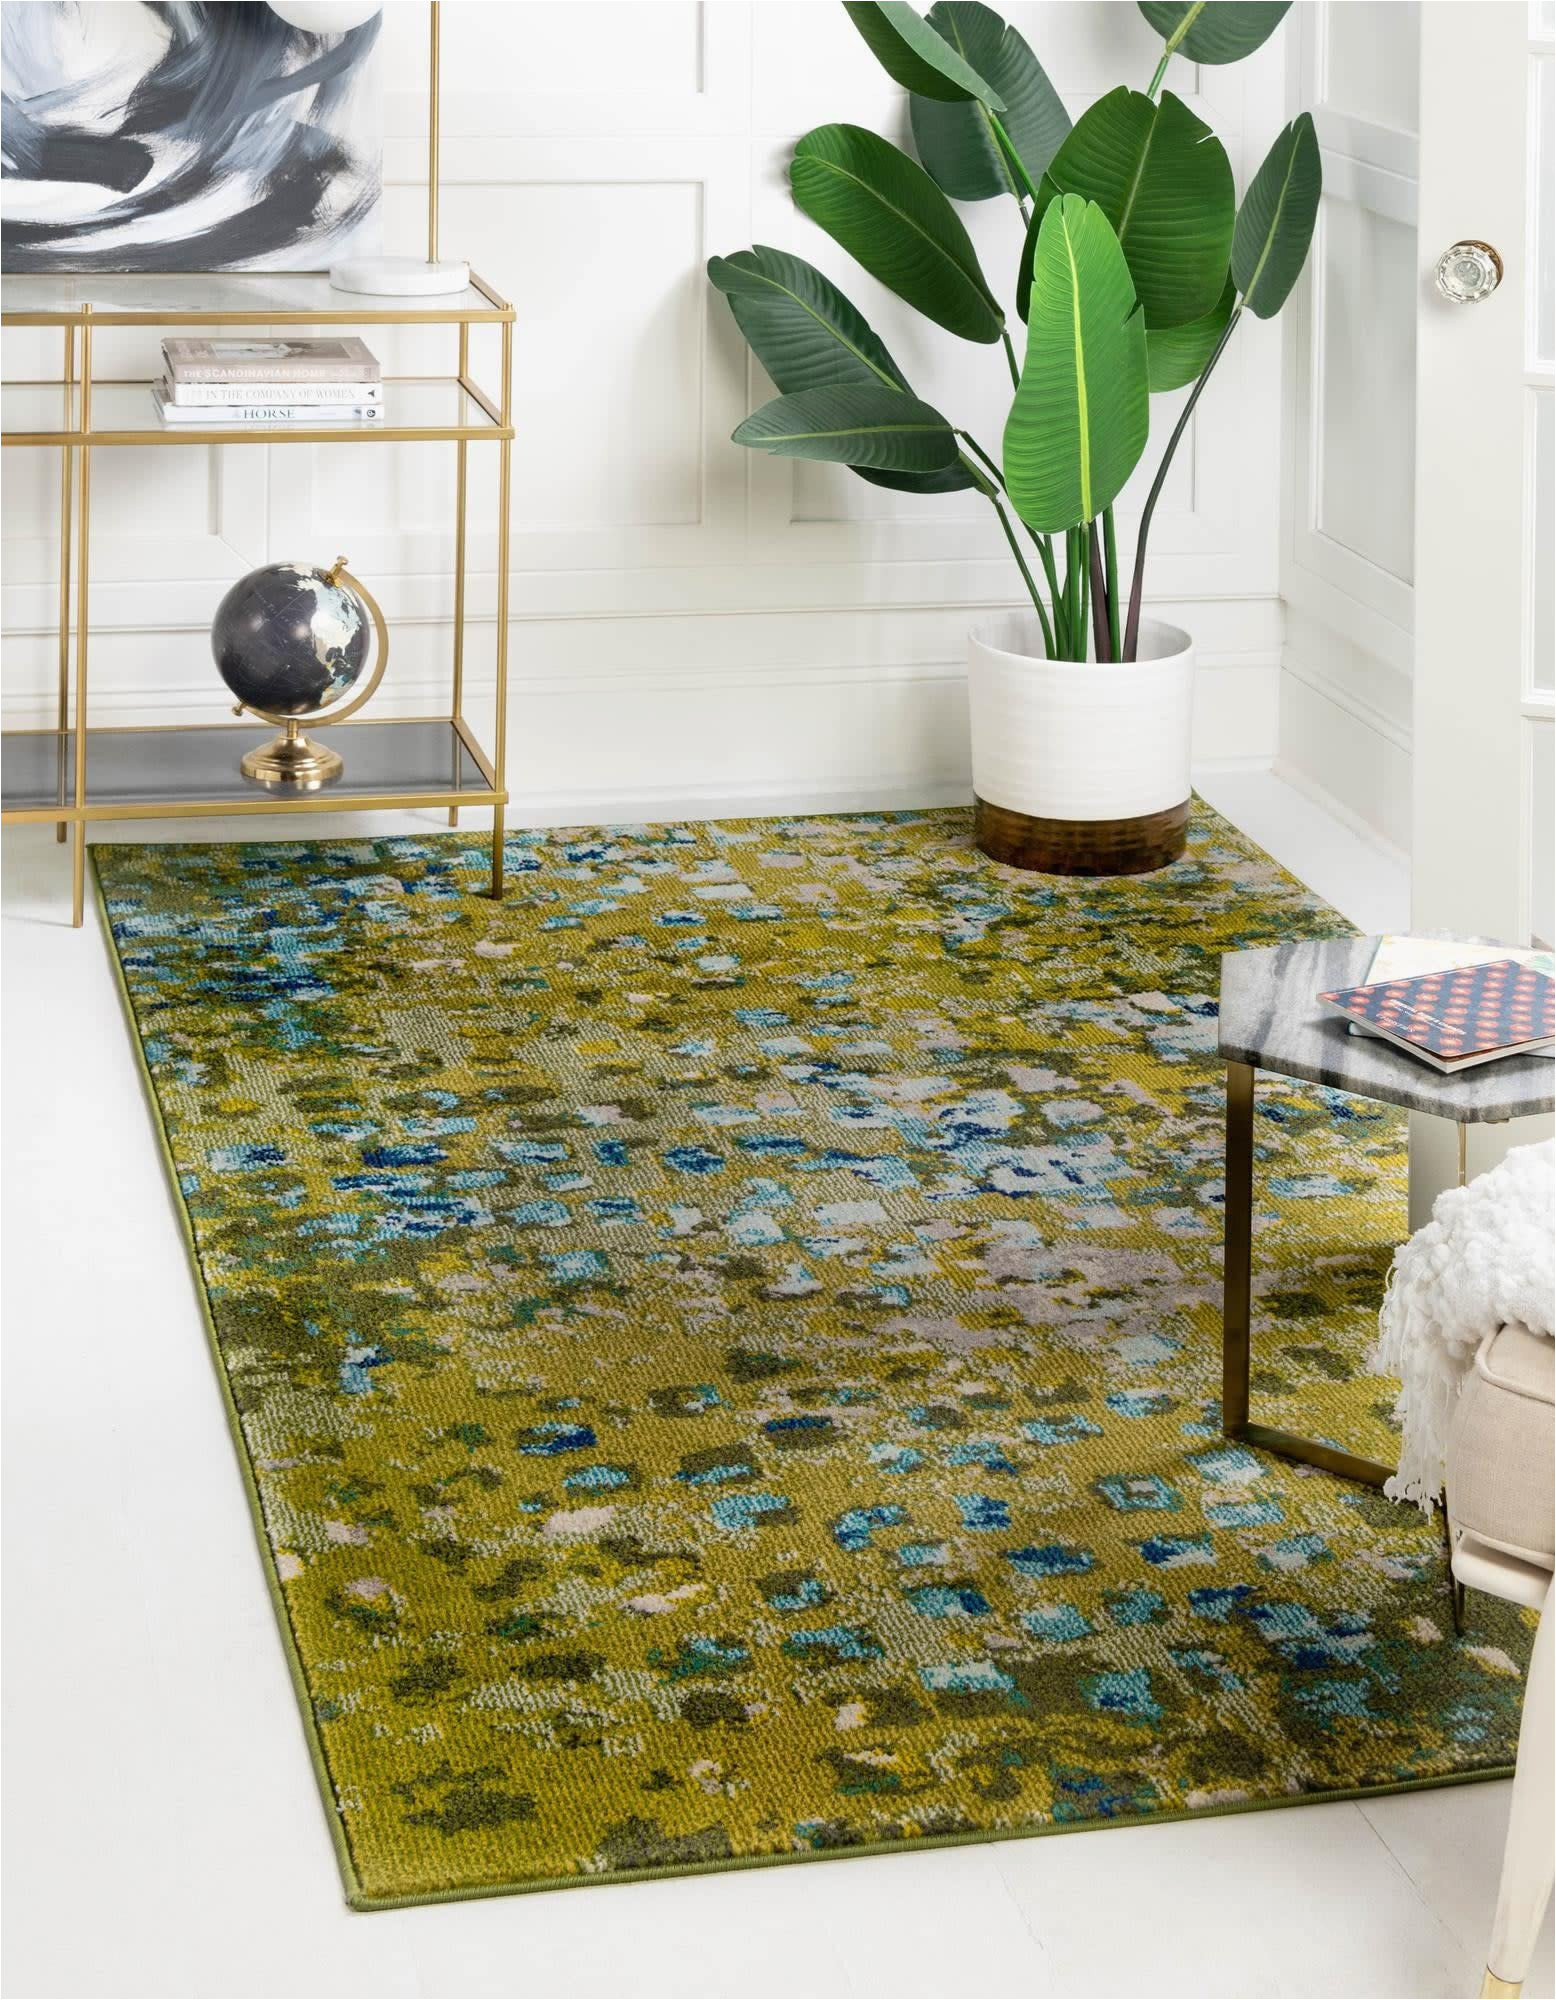 Adams Aqua area Rug by Red Barrel Studio Unique Loom Jardin Collection Colorful, Vibrant, Abstract, Modern area Rug, 4 X 6 Ft, Green/olive